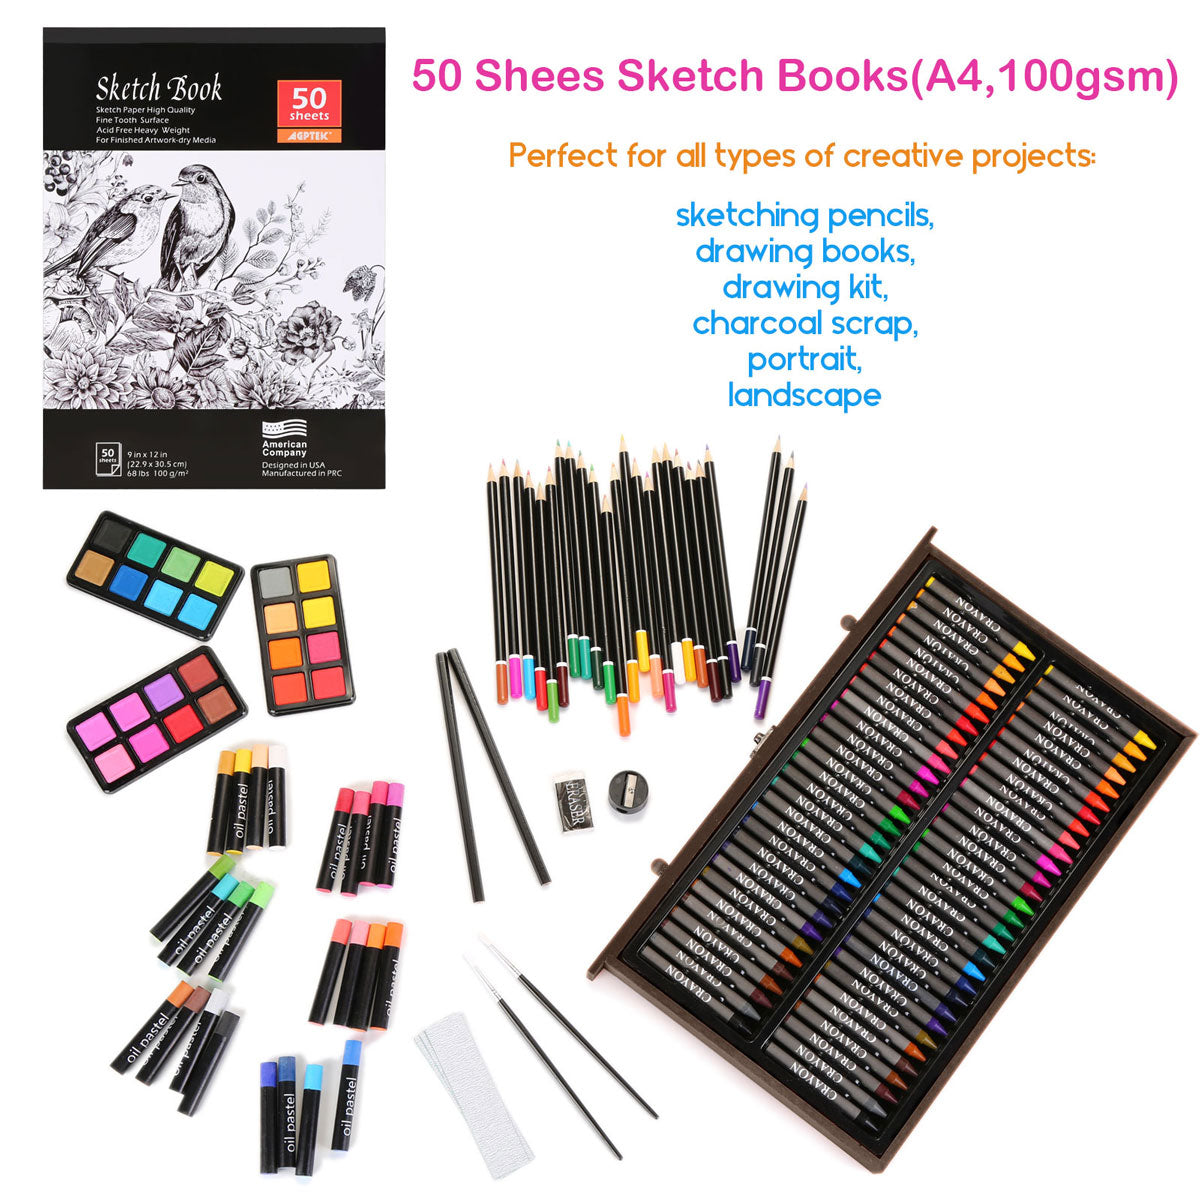 Art Set, 141 Pieces Deluxe Art Set, Wooden Painting Case & Art Supplies Kit  with Crayons, Colored Pencils, Sketch Pencils, Paint Brushes, Sharpener